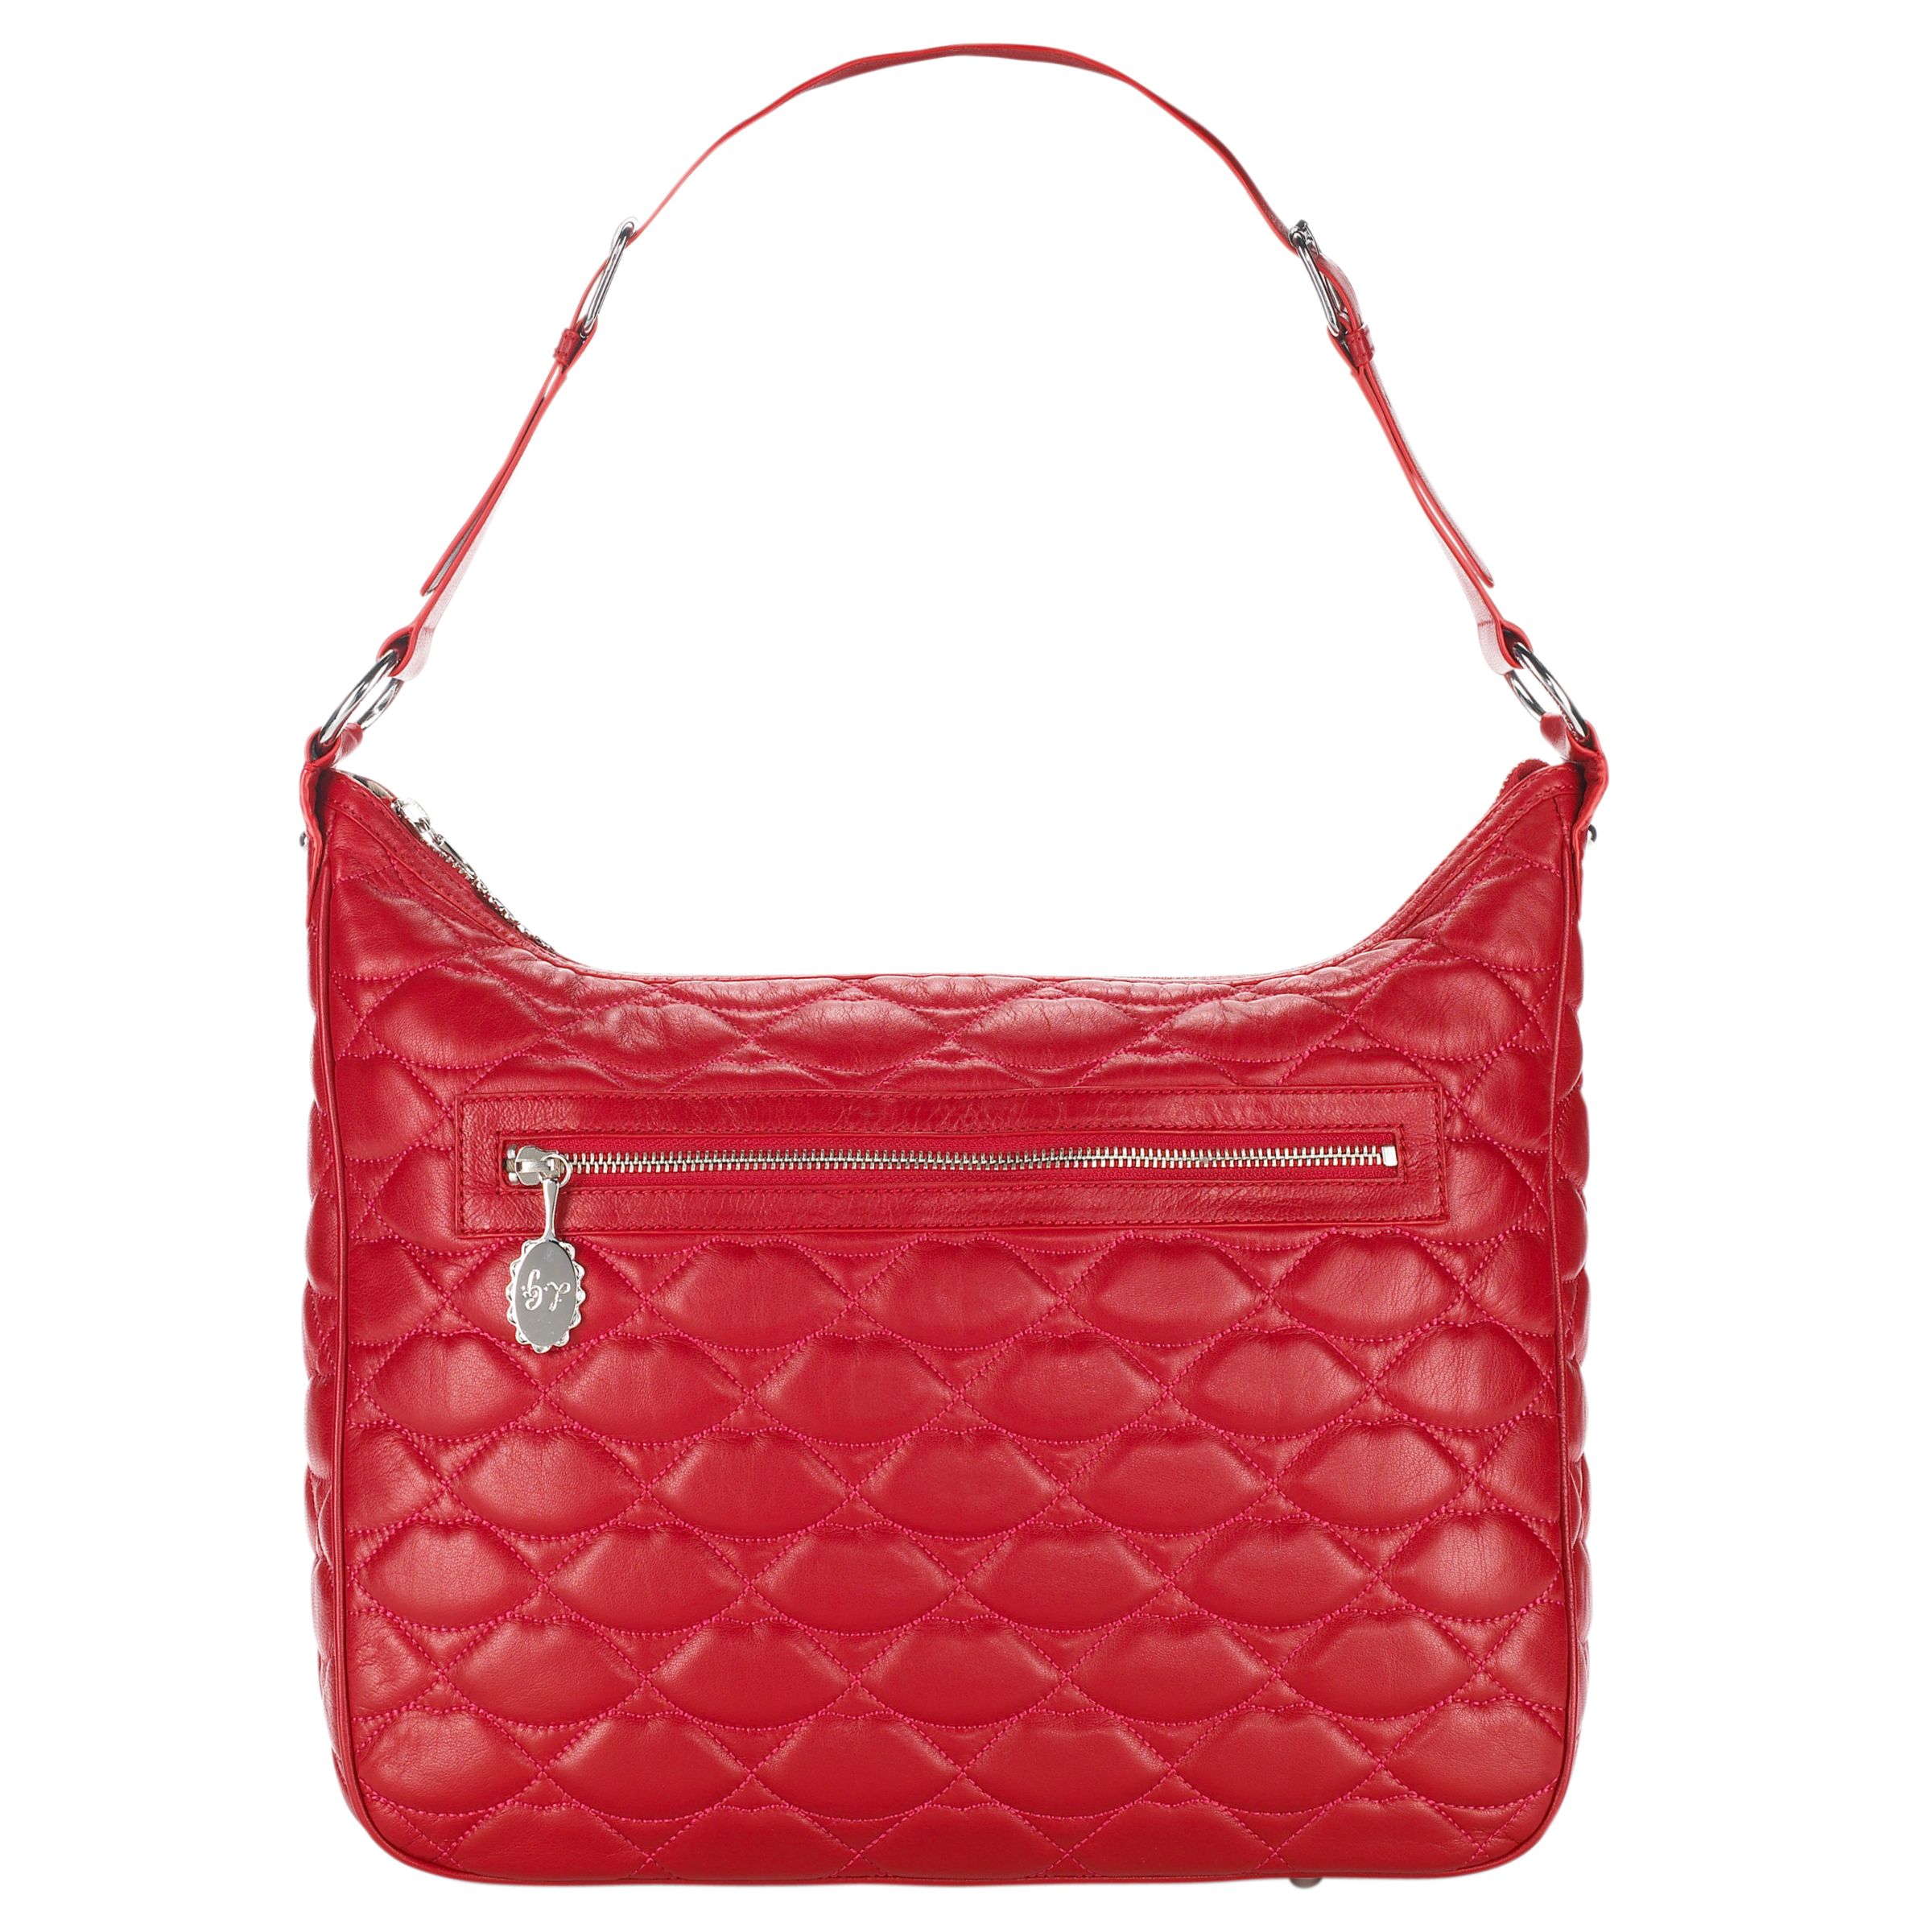 Lulu Guinness Quilted Lips Ruthie Hobo Handbag, Red at John Lewis